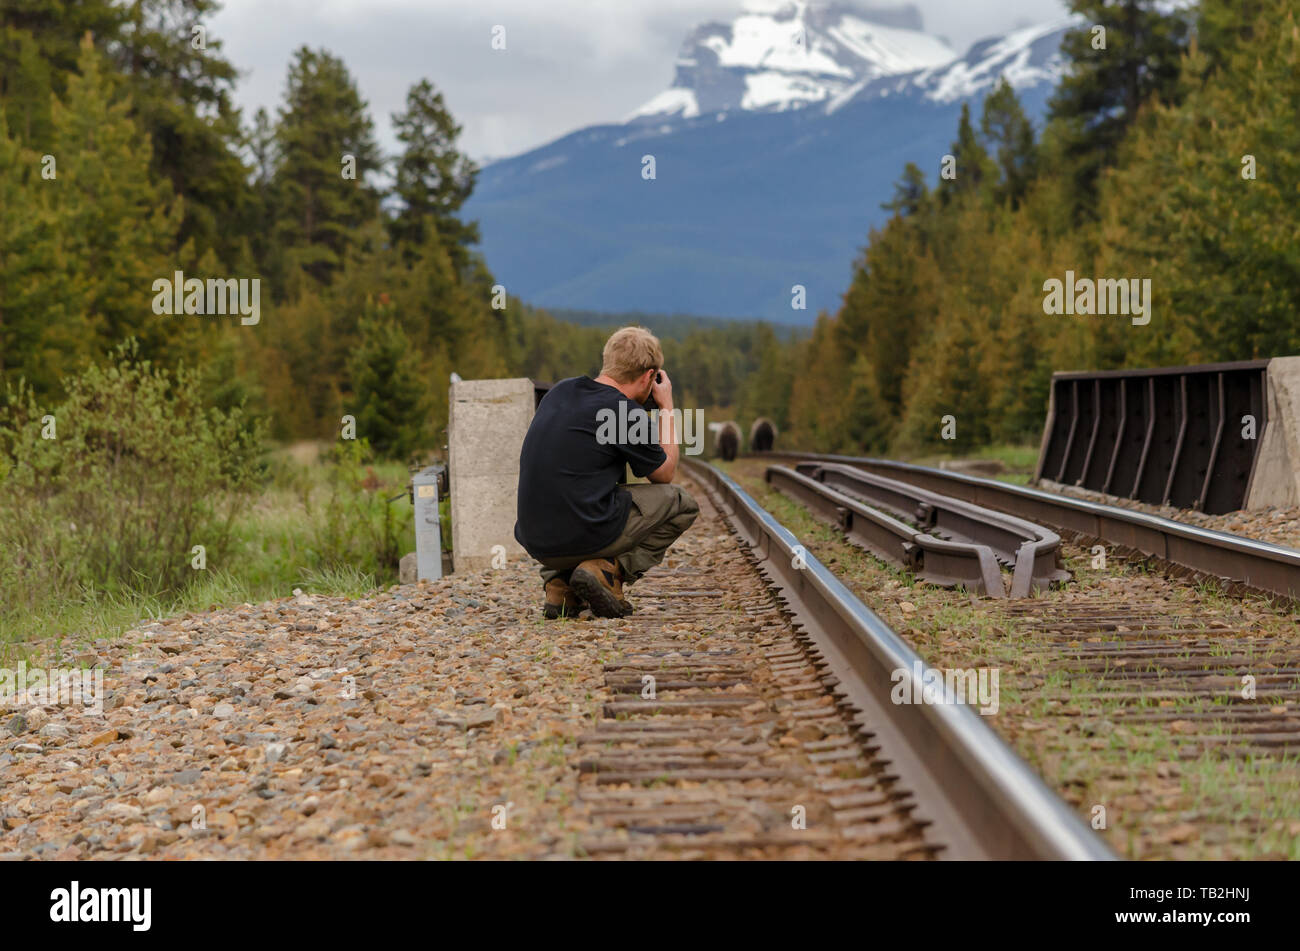 A photographer take a photo of two grizzly bears on the rail tracks Stock Photo